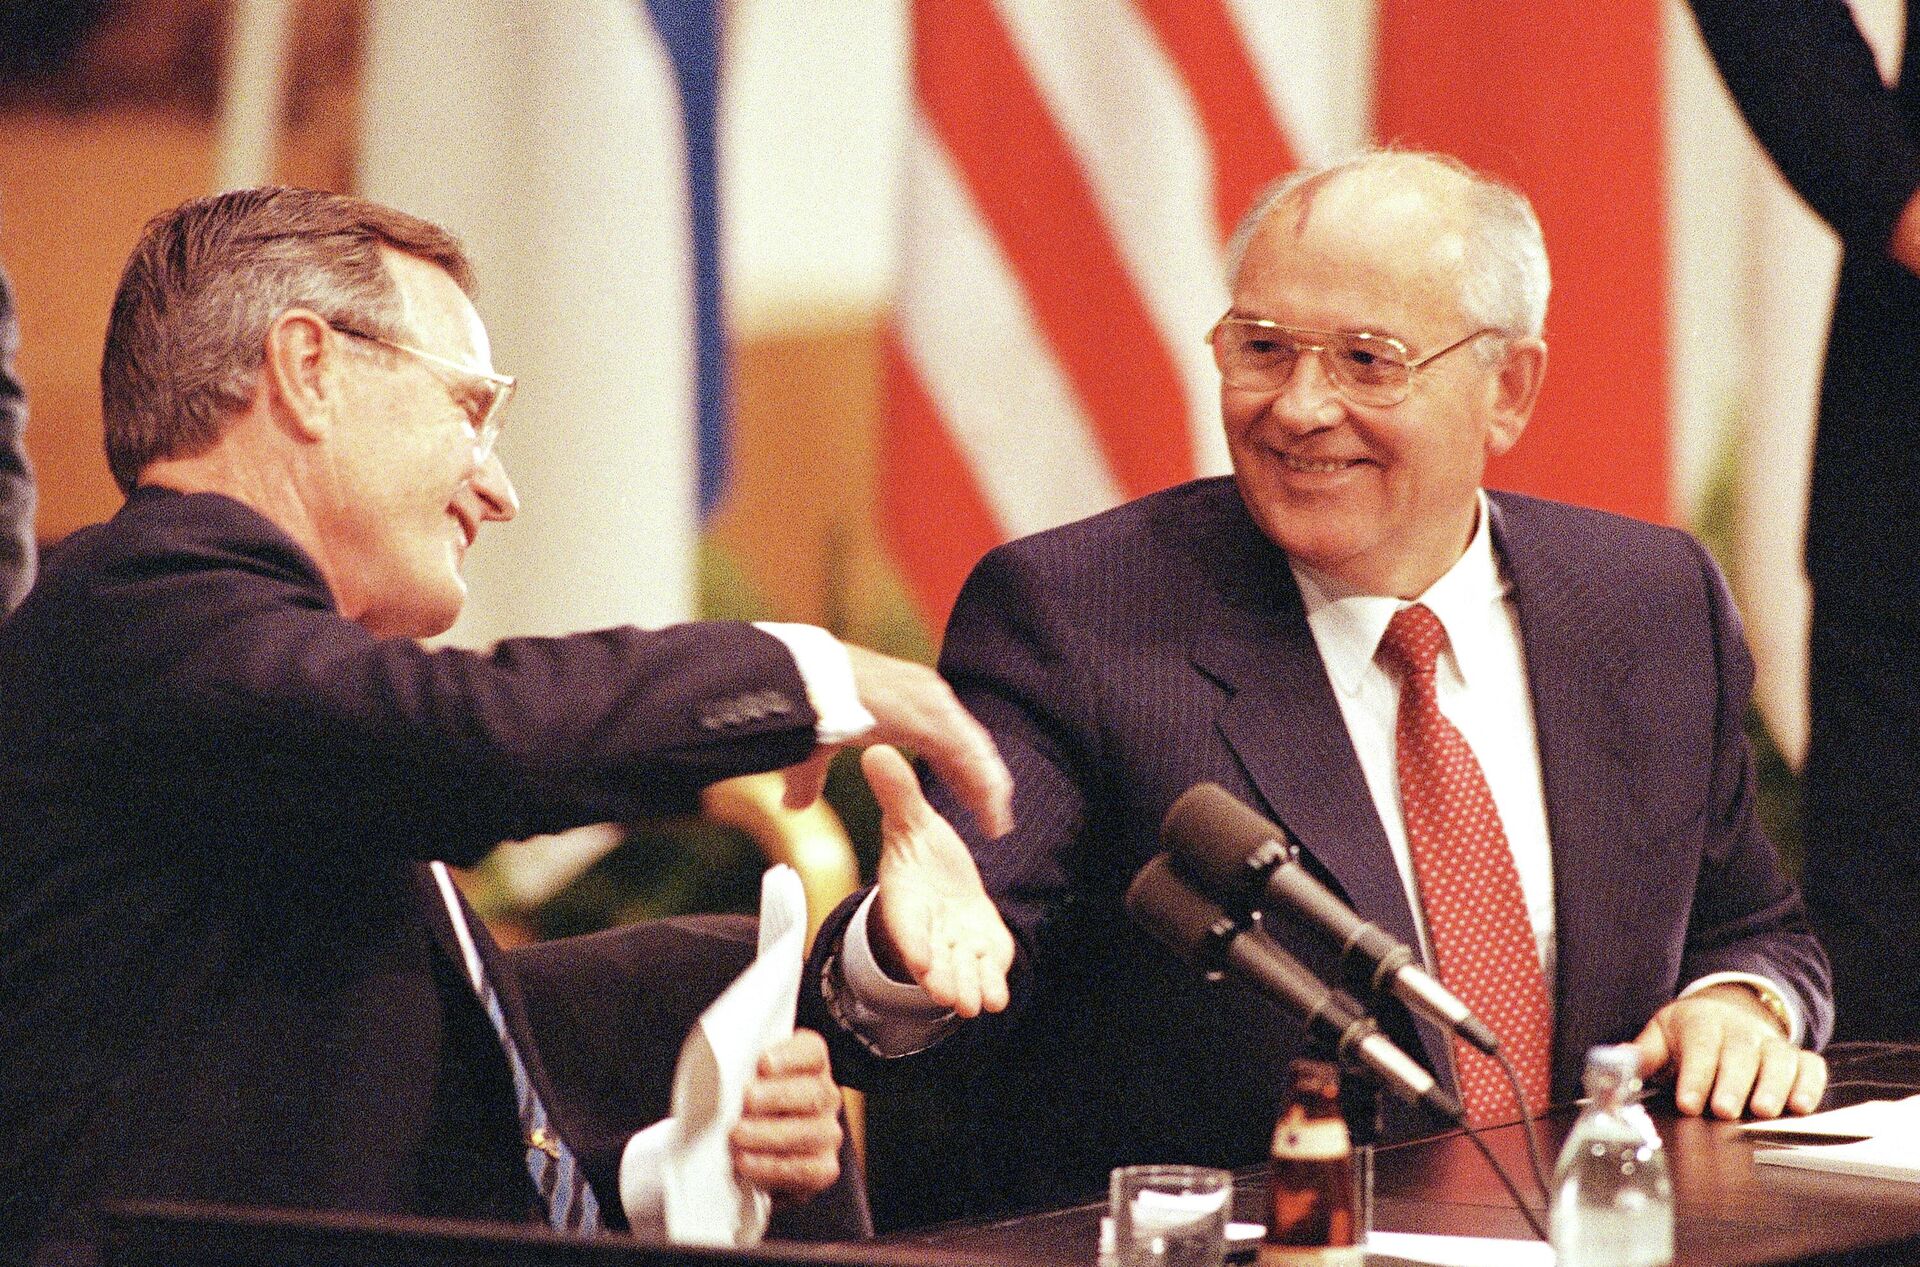 FILE - In this Sept. 9, 1990 file photo U.S. President George Bush shakes hands with Soviet President Mikhail Gorbachev at the conclusion of their joint news conference ending the one day summit in Helsinki, Finland. - Sputnik International, 1920, 31.12.2022